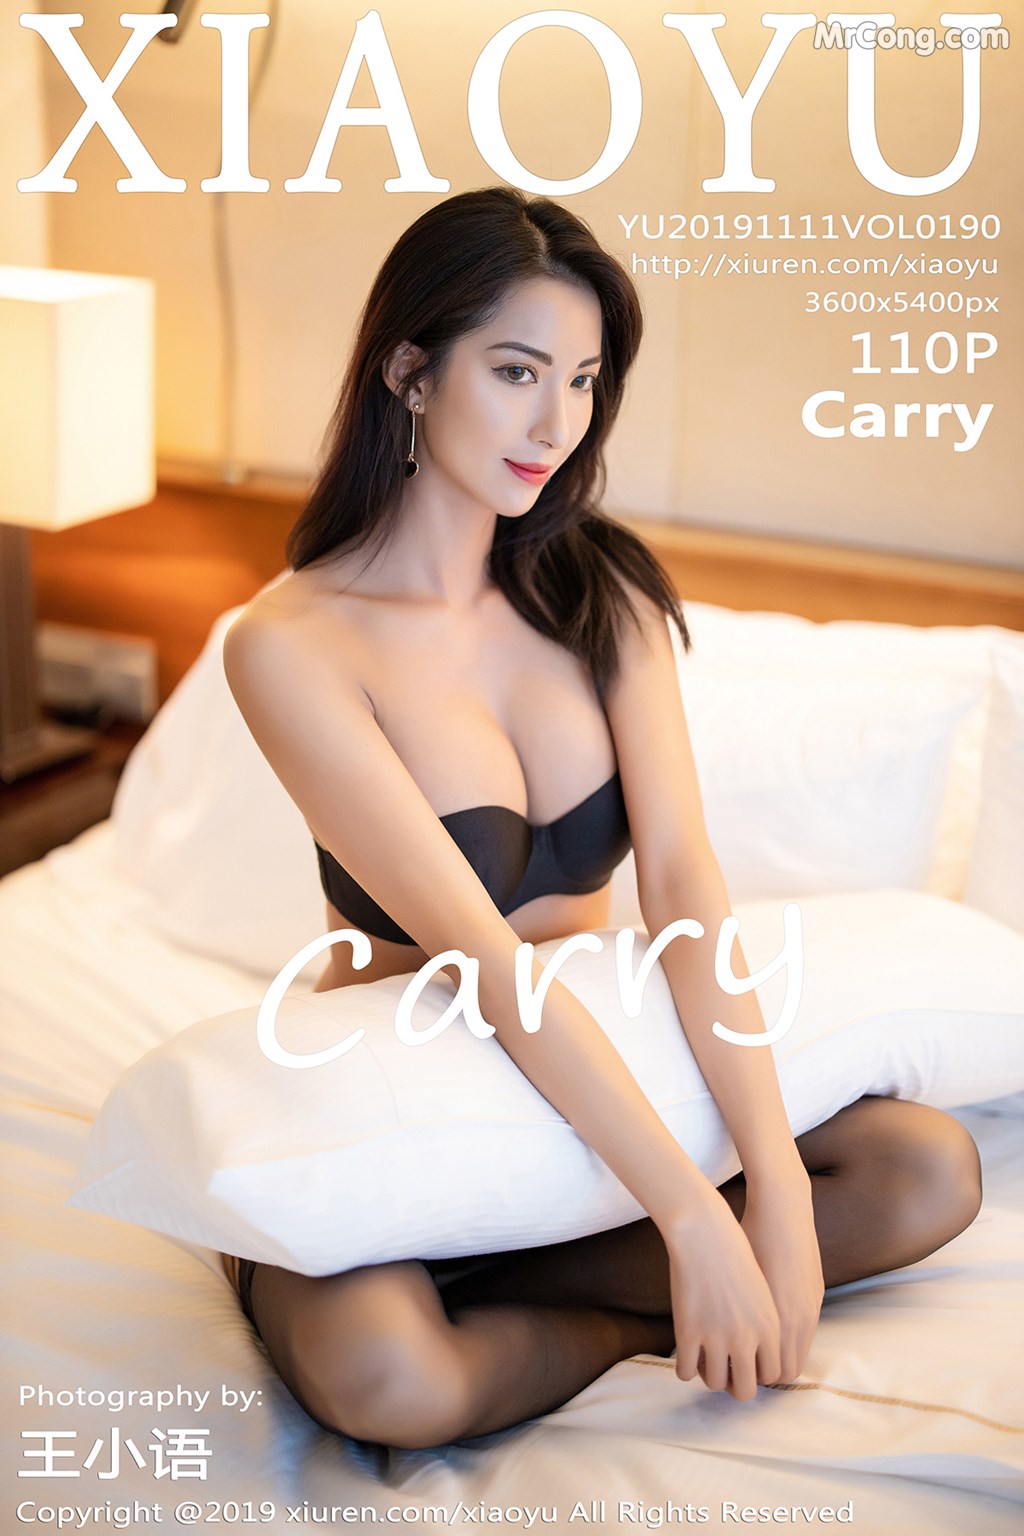 XiaoYu Vol.190: Carry (111 pictures) photo 1-0